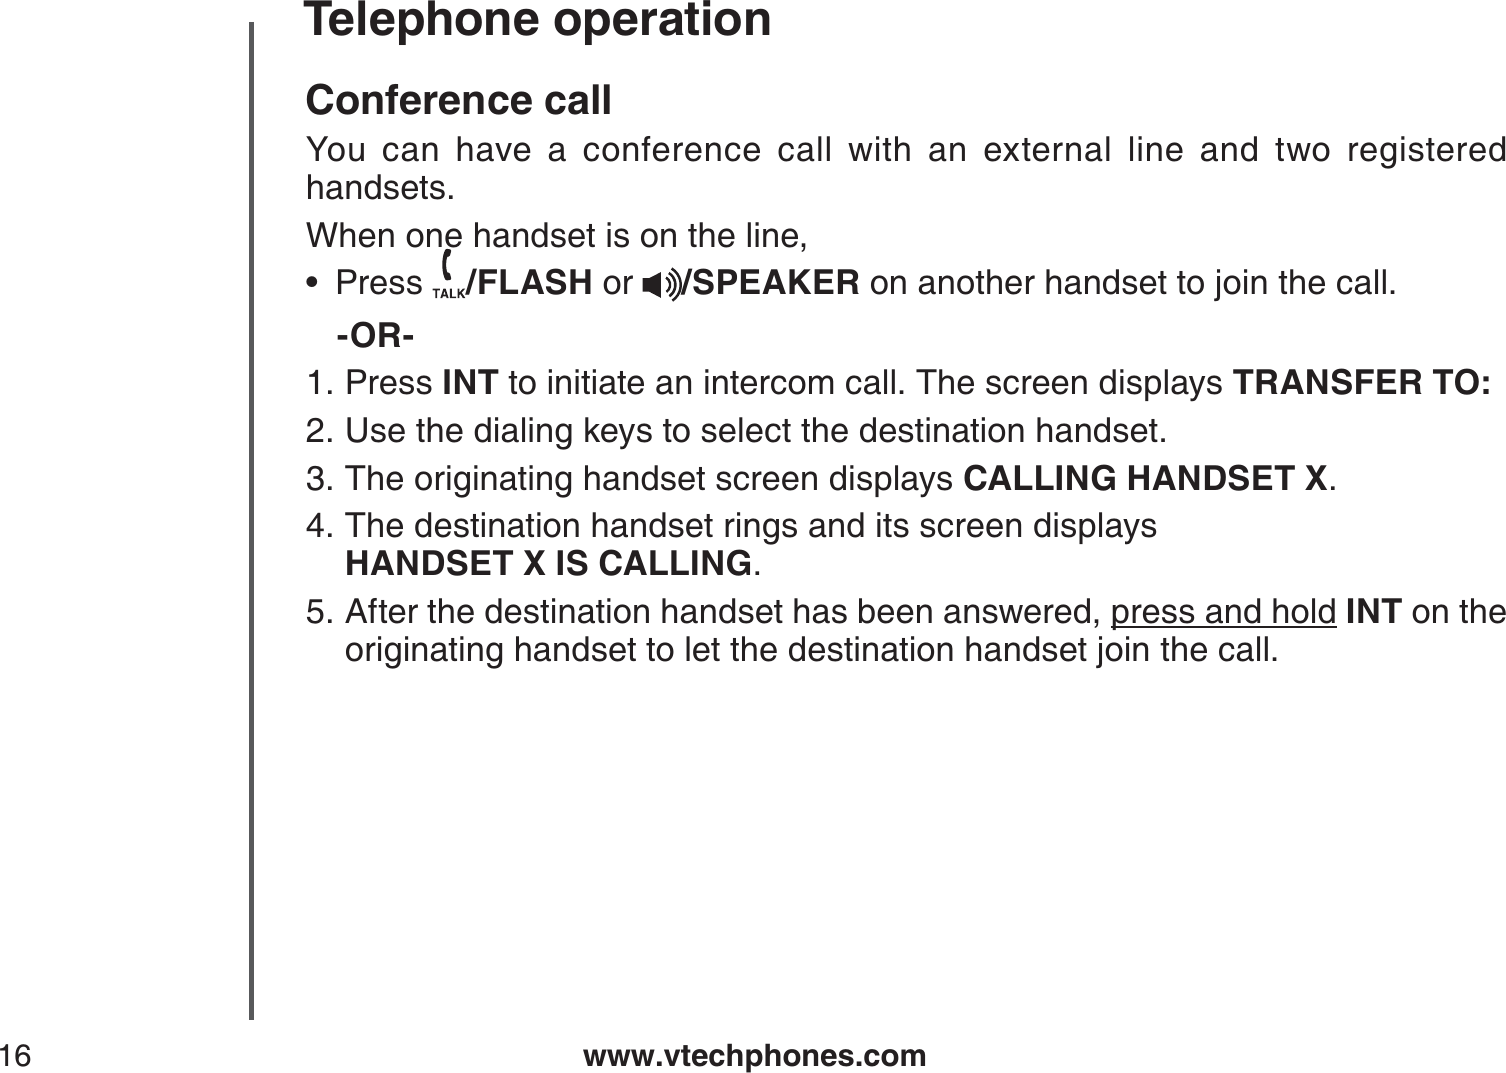 www.vtechphones.com16Telephone operationConference callYou can have a conference call with an external line and two registered handsets. When one handset is on the line,Press  /FLASH or  /SPEAKER on another handset to join the call.-OR-Press INT to initiate an intercom call. The screen displays TRANSFER TO:Use the dialing keys to select the destination handset.The originating handset screen displays CALLING HANDSET X.The destination handset rings and its screen displays     HANDSET X IS CALLING.After the destination handset has been answered, press and hold INT on the originating handset to let the destination handset join the call.•1.2.3.4.5.